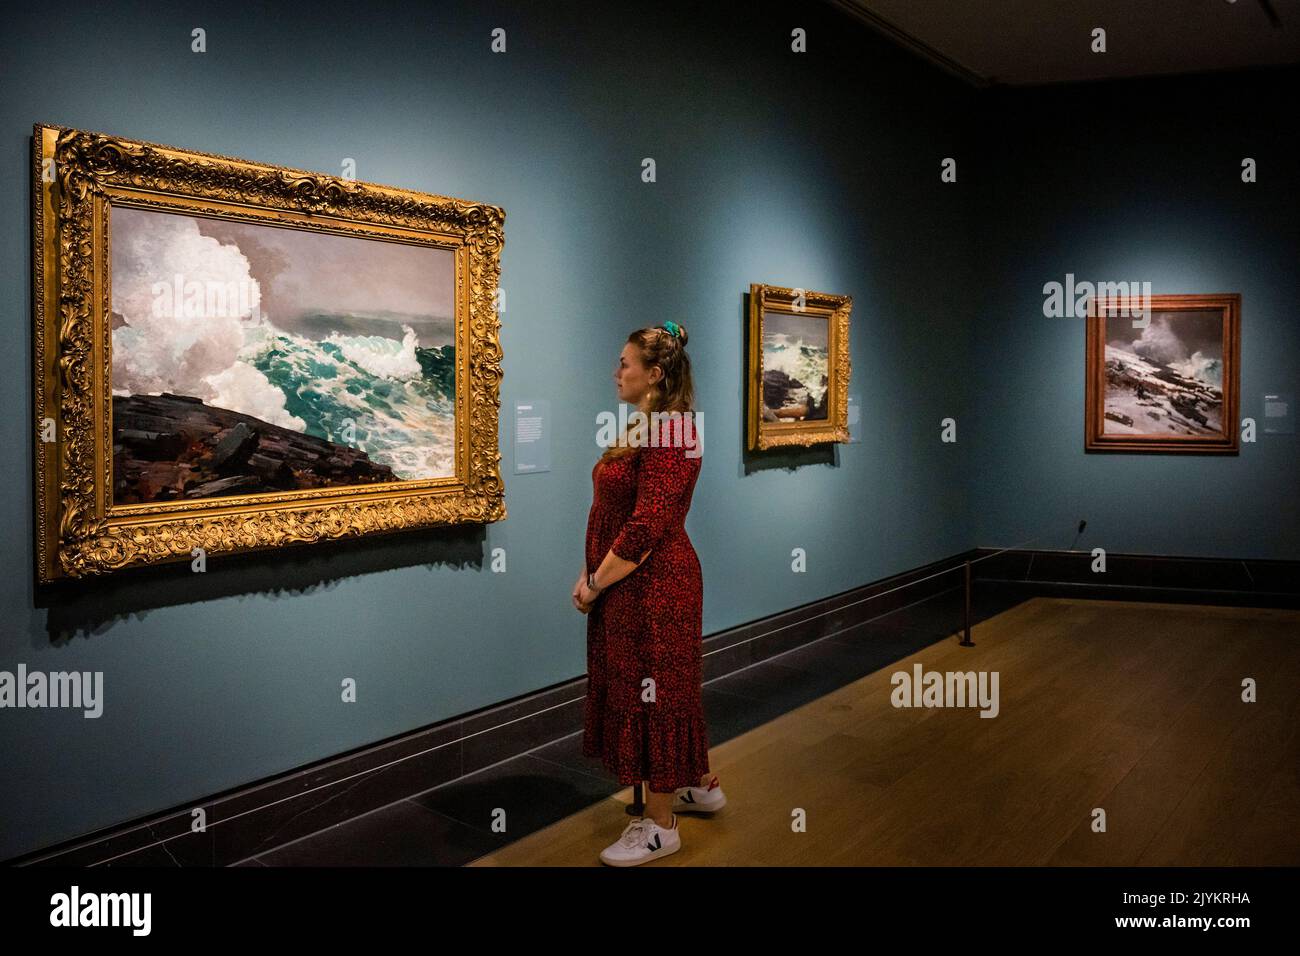 London, UK. 8th Sep, 2022. Northeaster, 1895, with Driftwood, 1909, and other pure seascapes - Preview of Winslow Homer: Force of Nature at the National Gallery. He was one of the most celebrated American painters of the late 19th and early 20th centuries. This exhibition, which will display around 50 paintings and watercolours from public and private collections, spanning over 40 years. It is co-organised with The Metropolitan Museum of Art, New York and runs 10 September 2022 - 8 January 2023. There is no painting by Homer in a UK public collection. Credit: Guy Bell/Alamy Live News Stock Photo